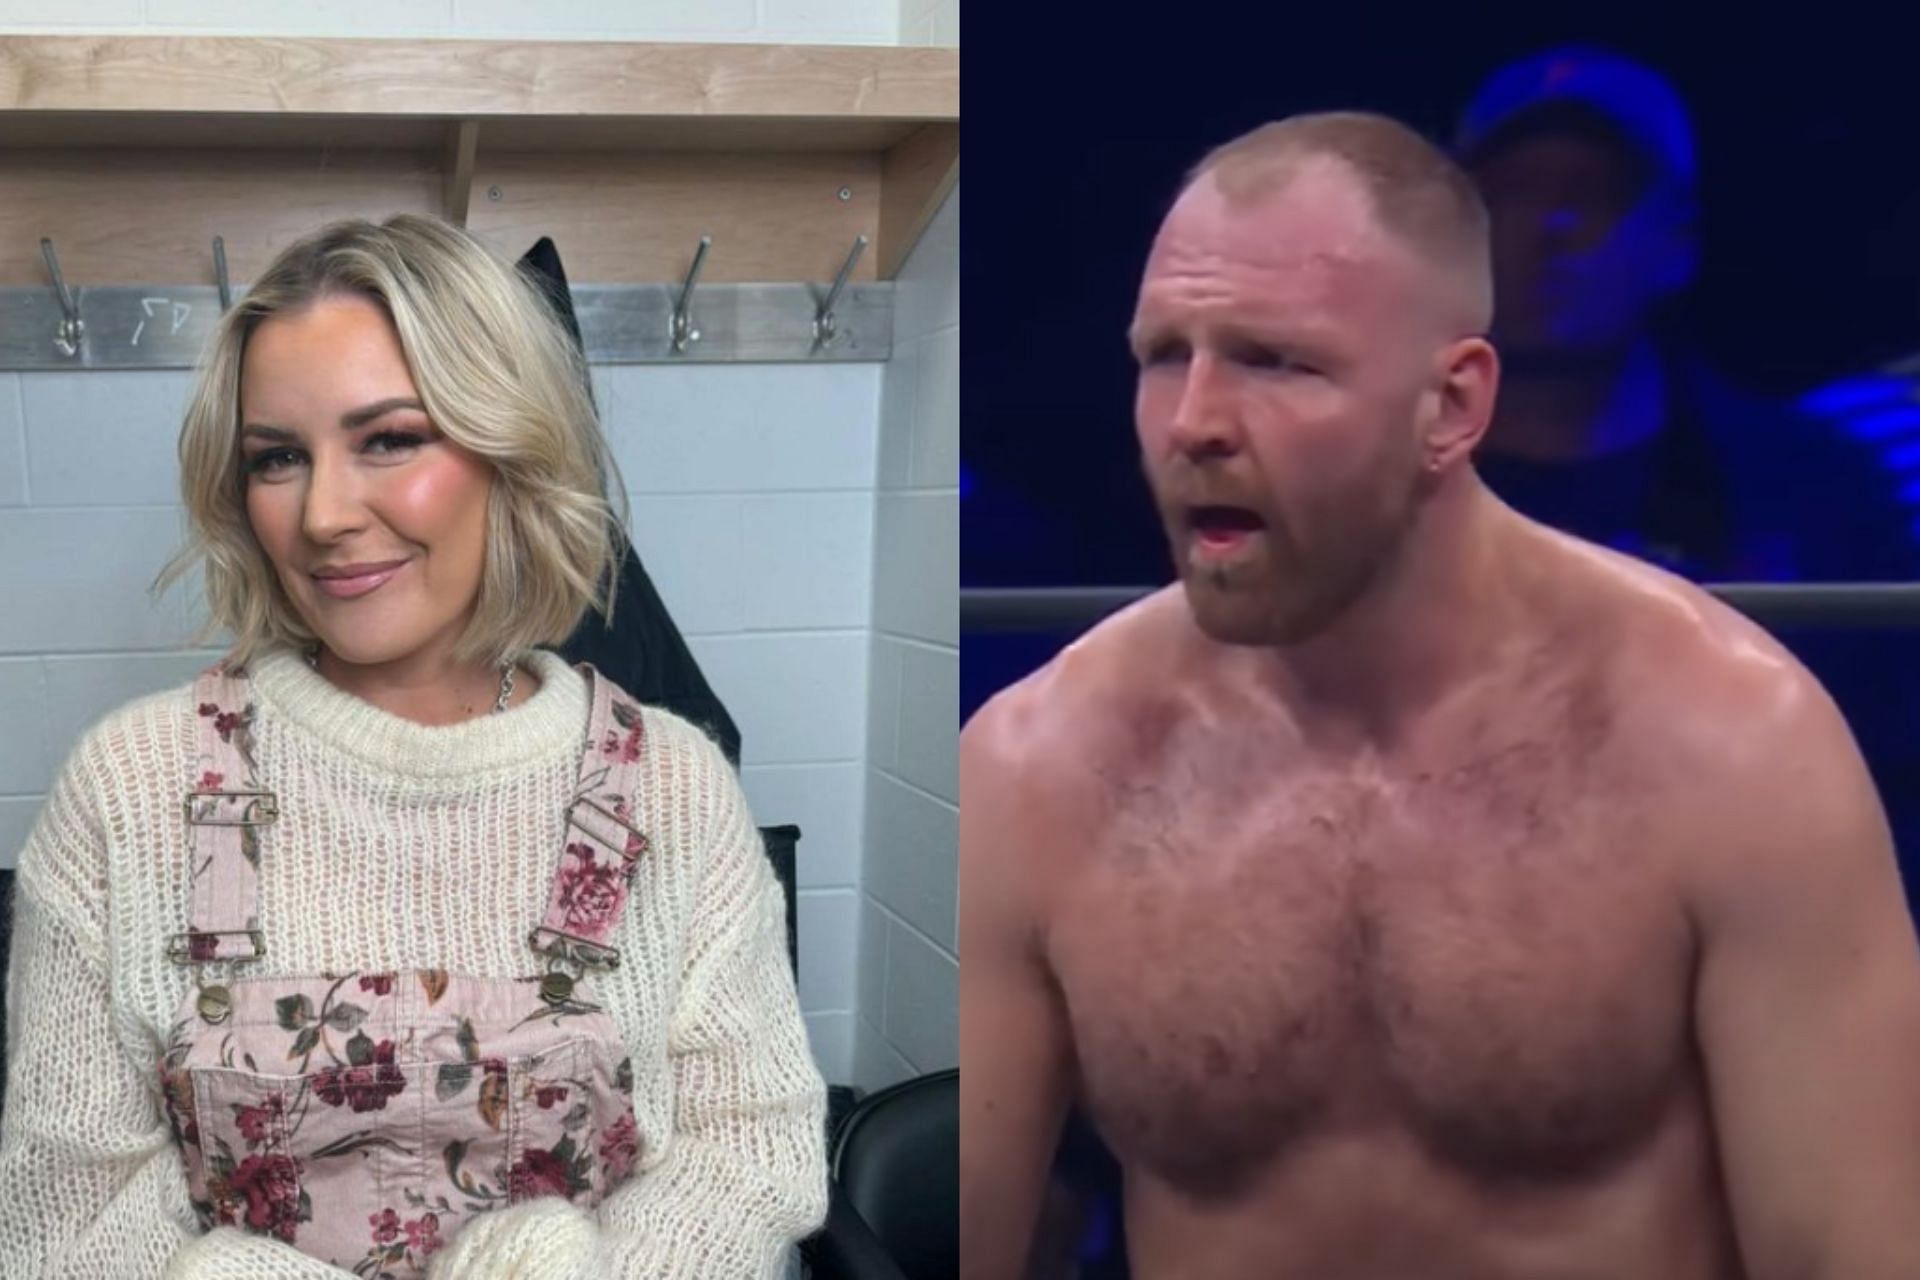 Renee Paquette shares her proud moment with hubby Jon Moxley